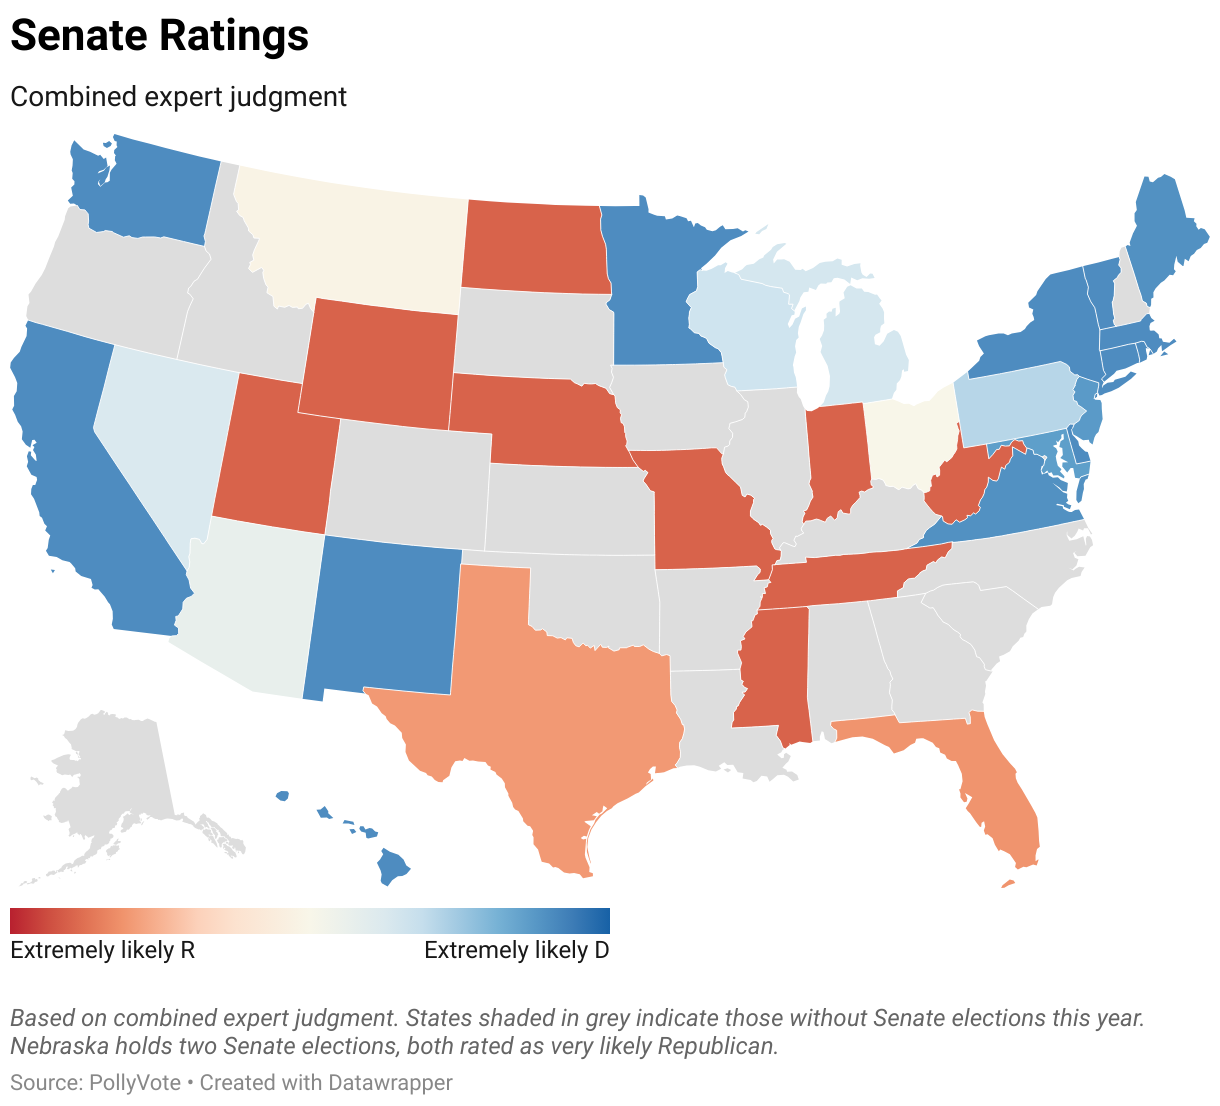 Senate Map based on combined expert judgment